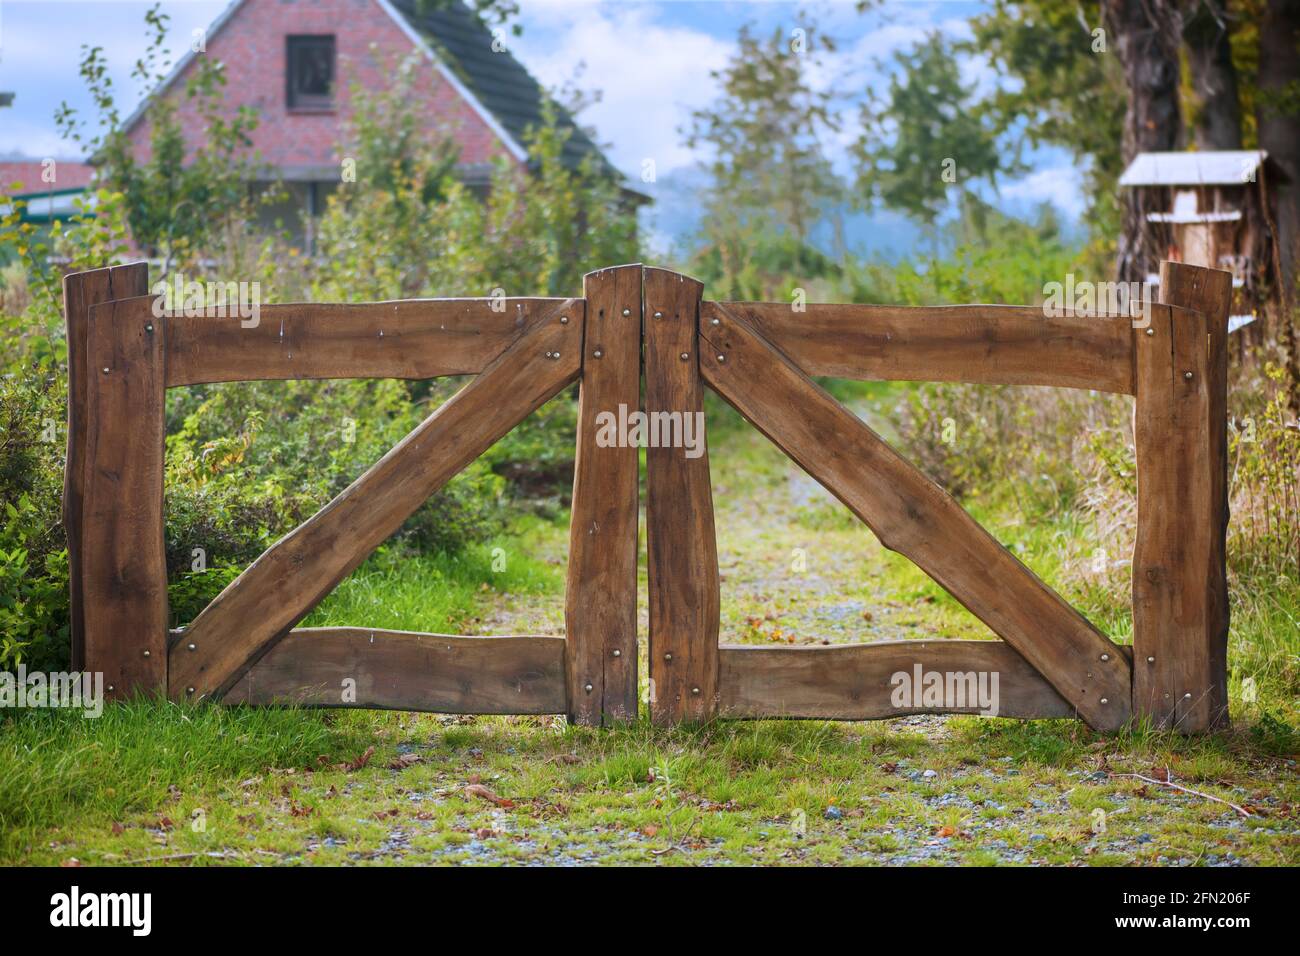 Frontal view of a double-leaf entrance gate built from wide wooden boards with a shallow depth of field in a rural setting in daylight Stock Photo